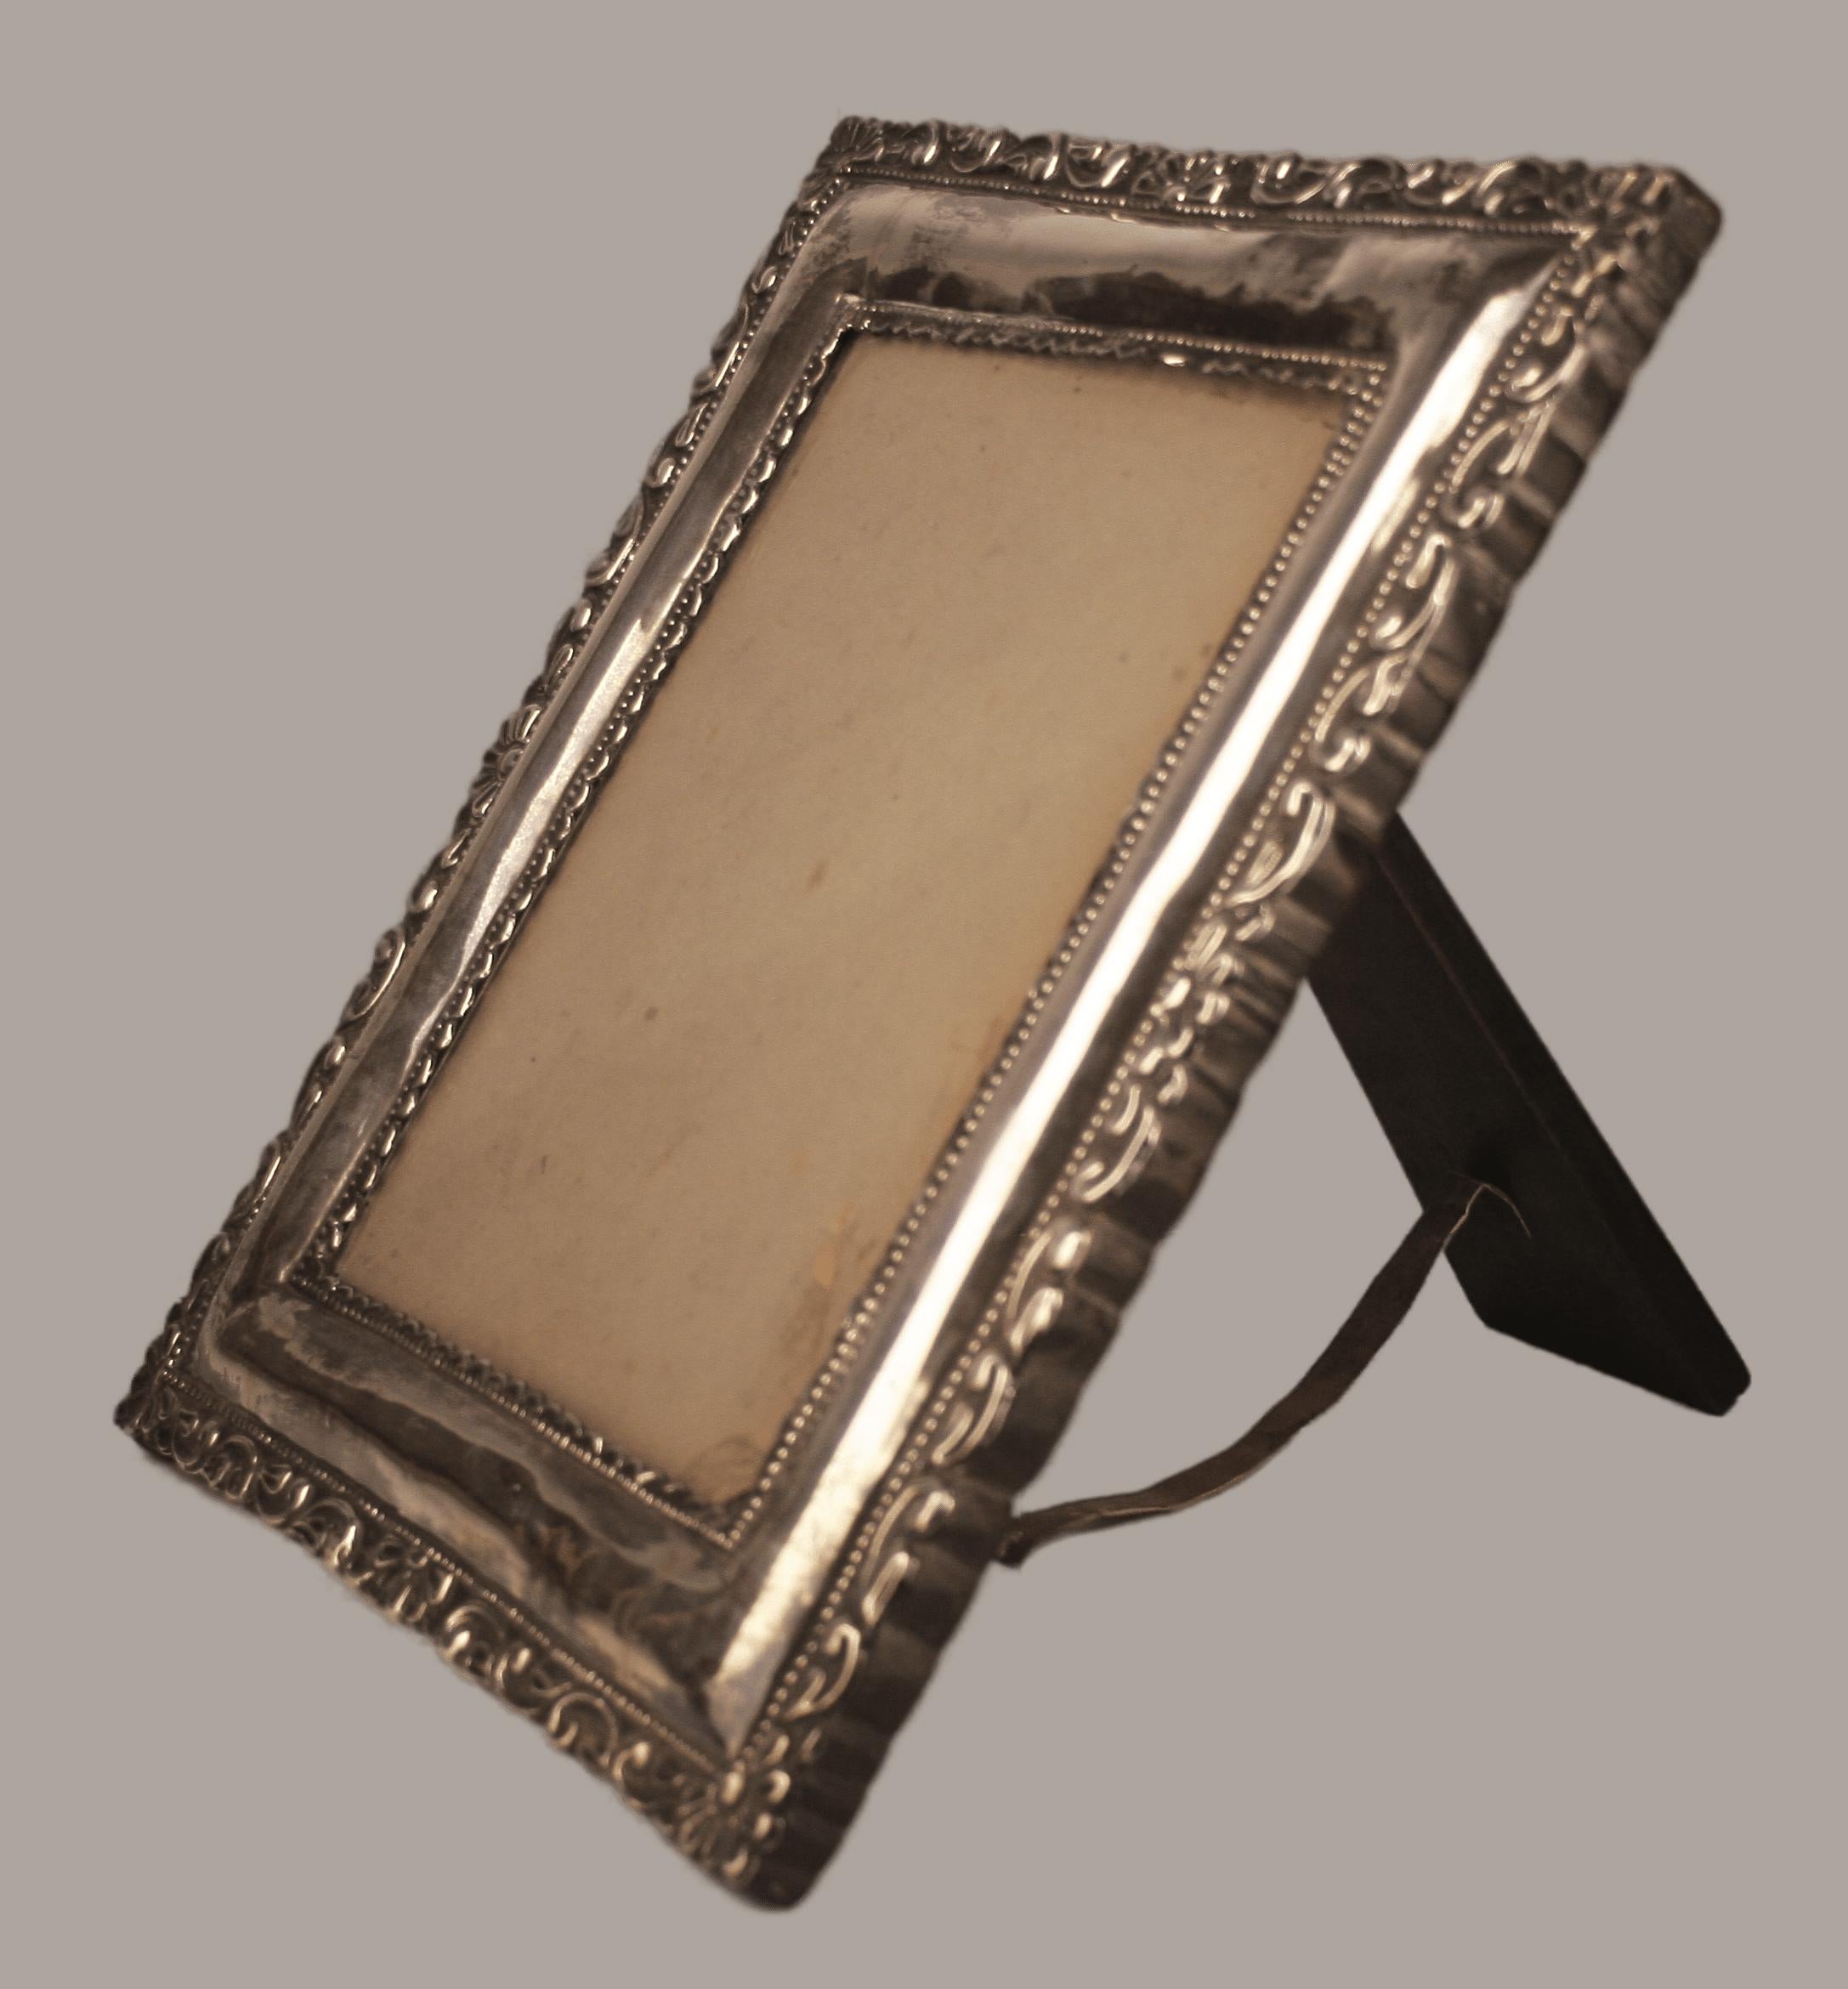 Circa 1900 Neoclassical wooden frame with repoussé silvered metal front plate

By: unknown
Material: glass, silver, wood, metal, leather
Technique: repoussé, polished, metalwork, silvered
Dimensions: 1.5 in x 11.5 in x 13.5 in
Date: circa